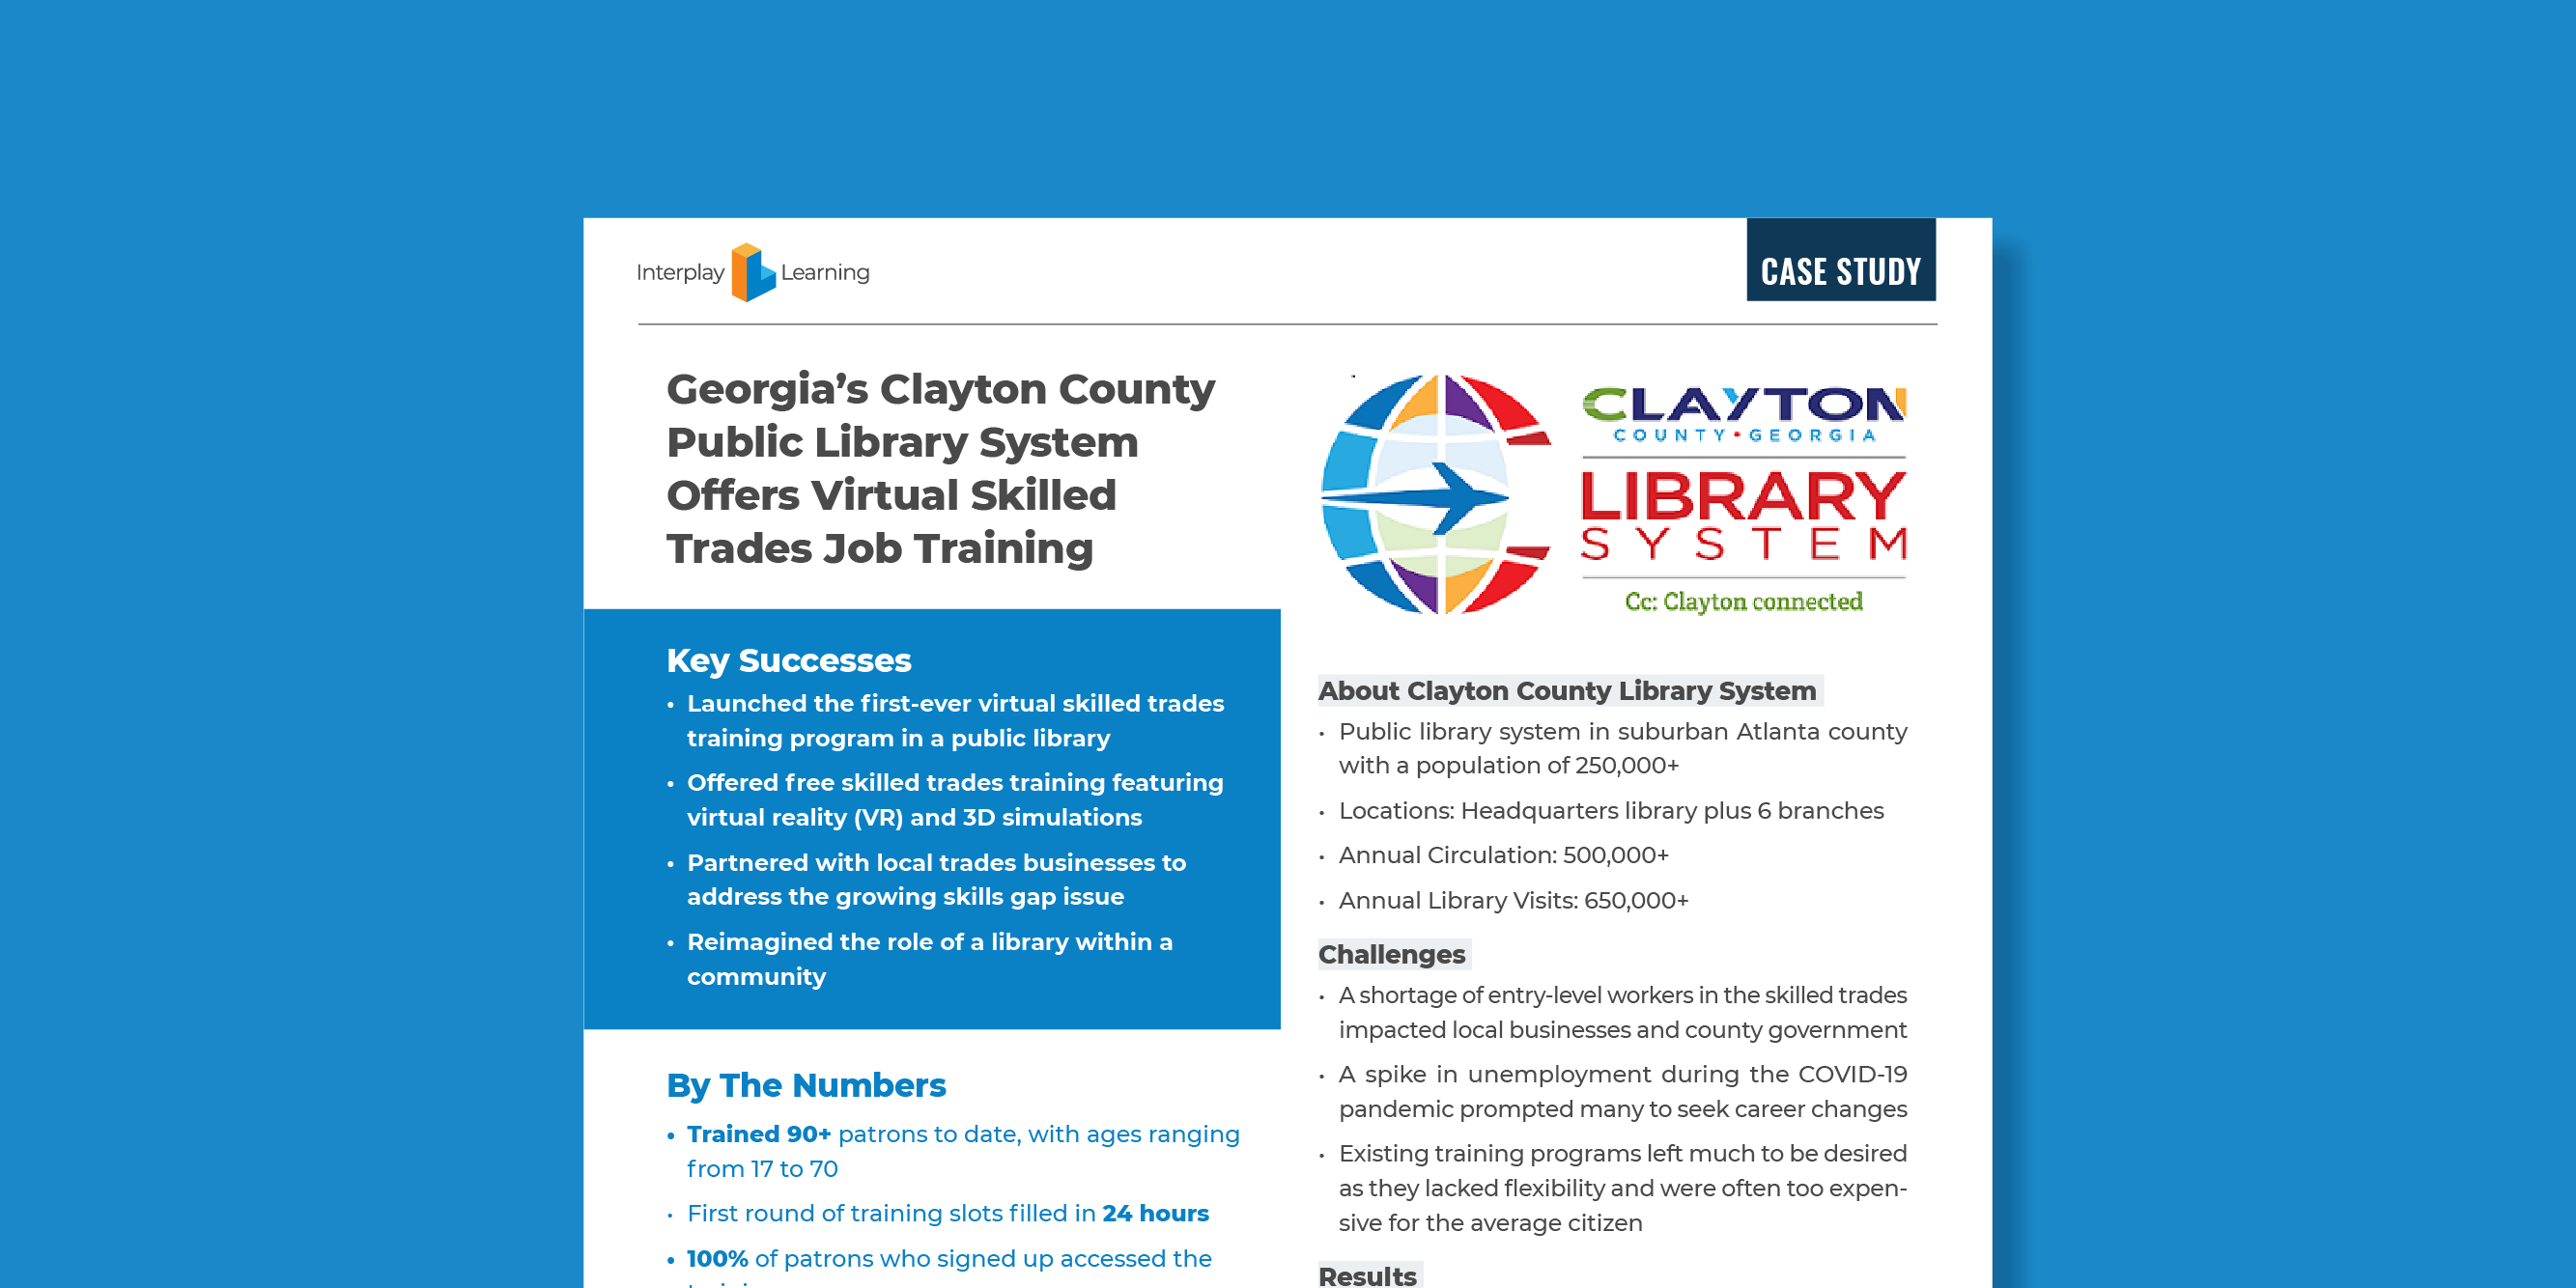 A snapshot of a case study on Clayon County Library offering virtual skilled trades job training